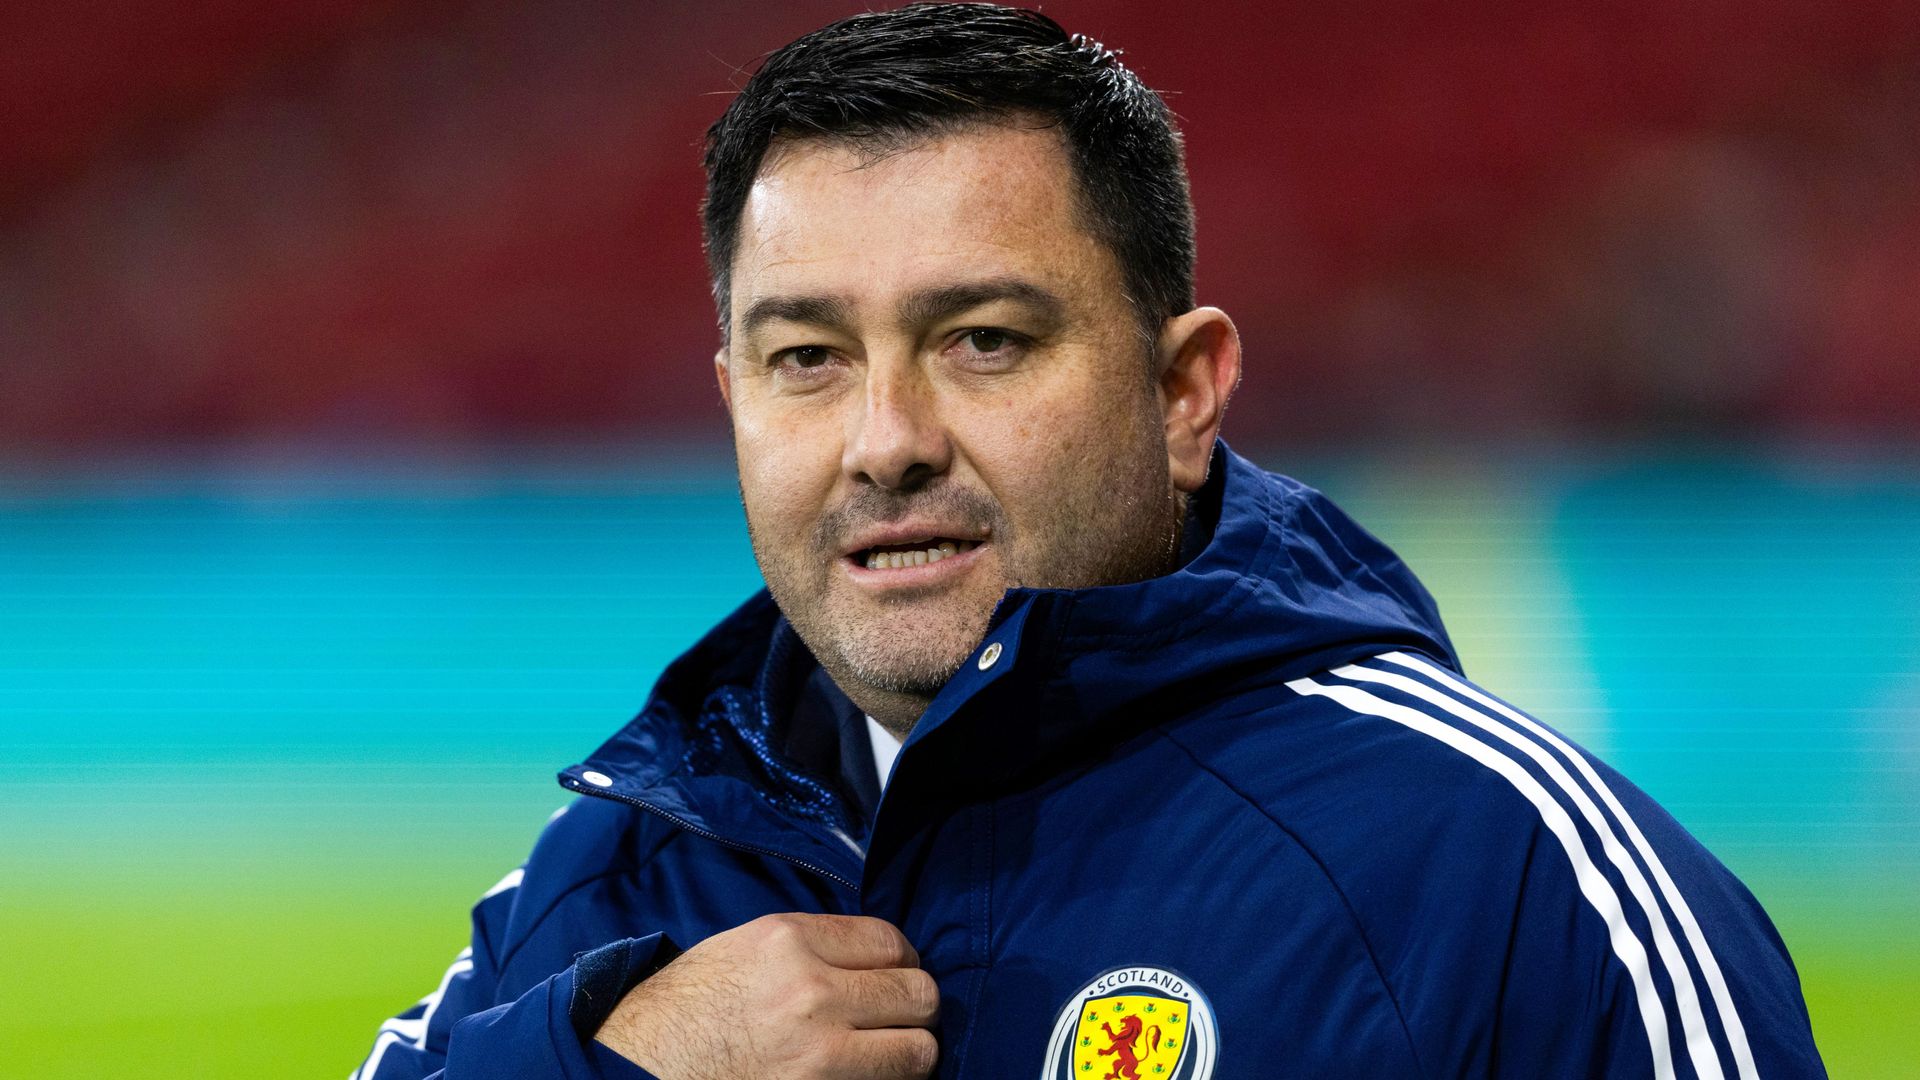 'No control over situation' - Scotland boss prepares for Israel qualifier